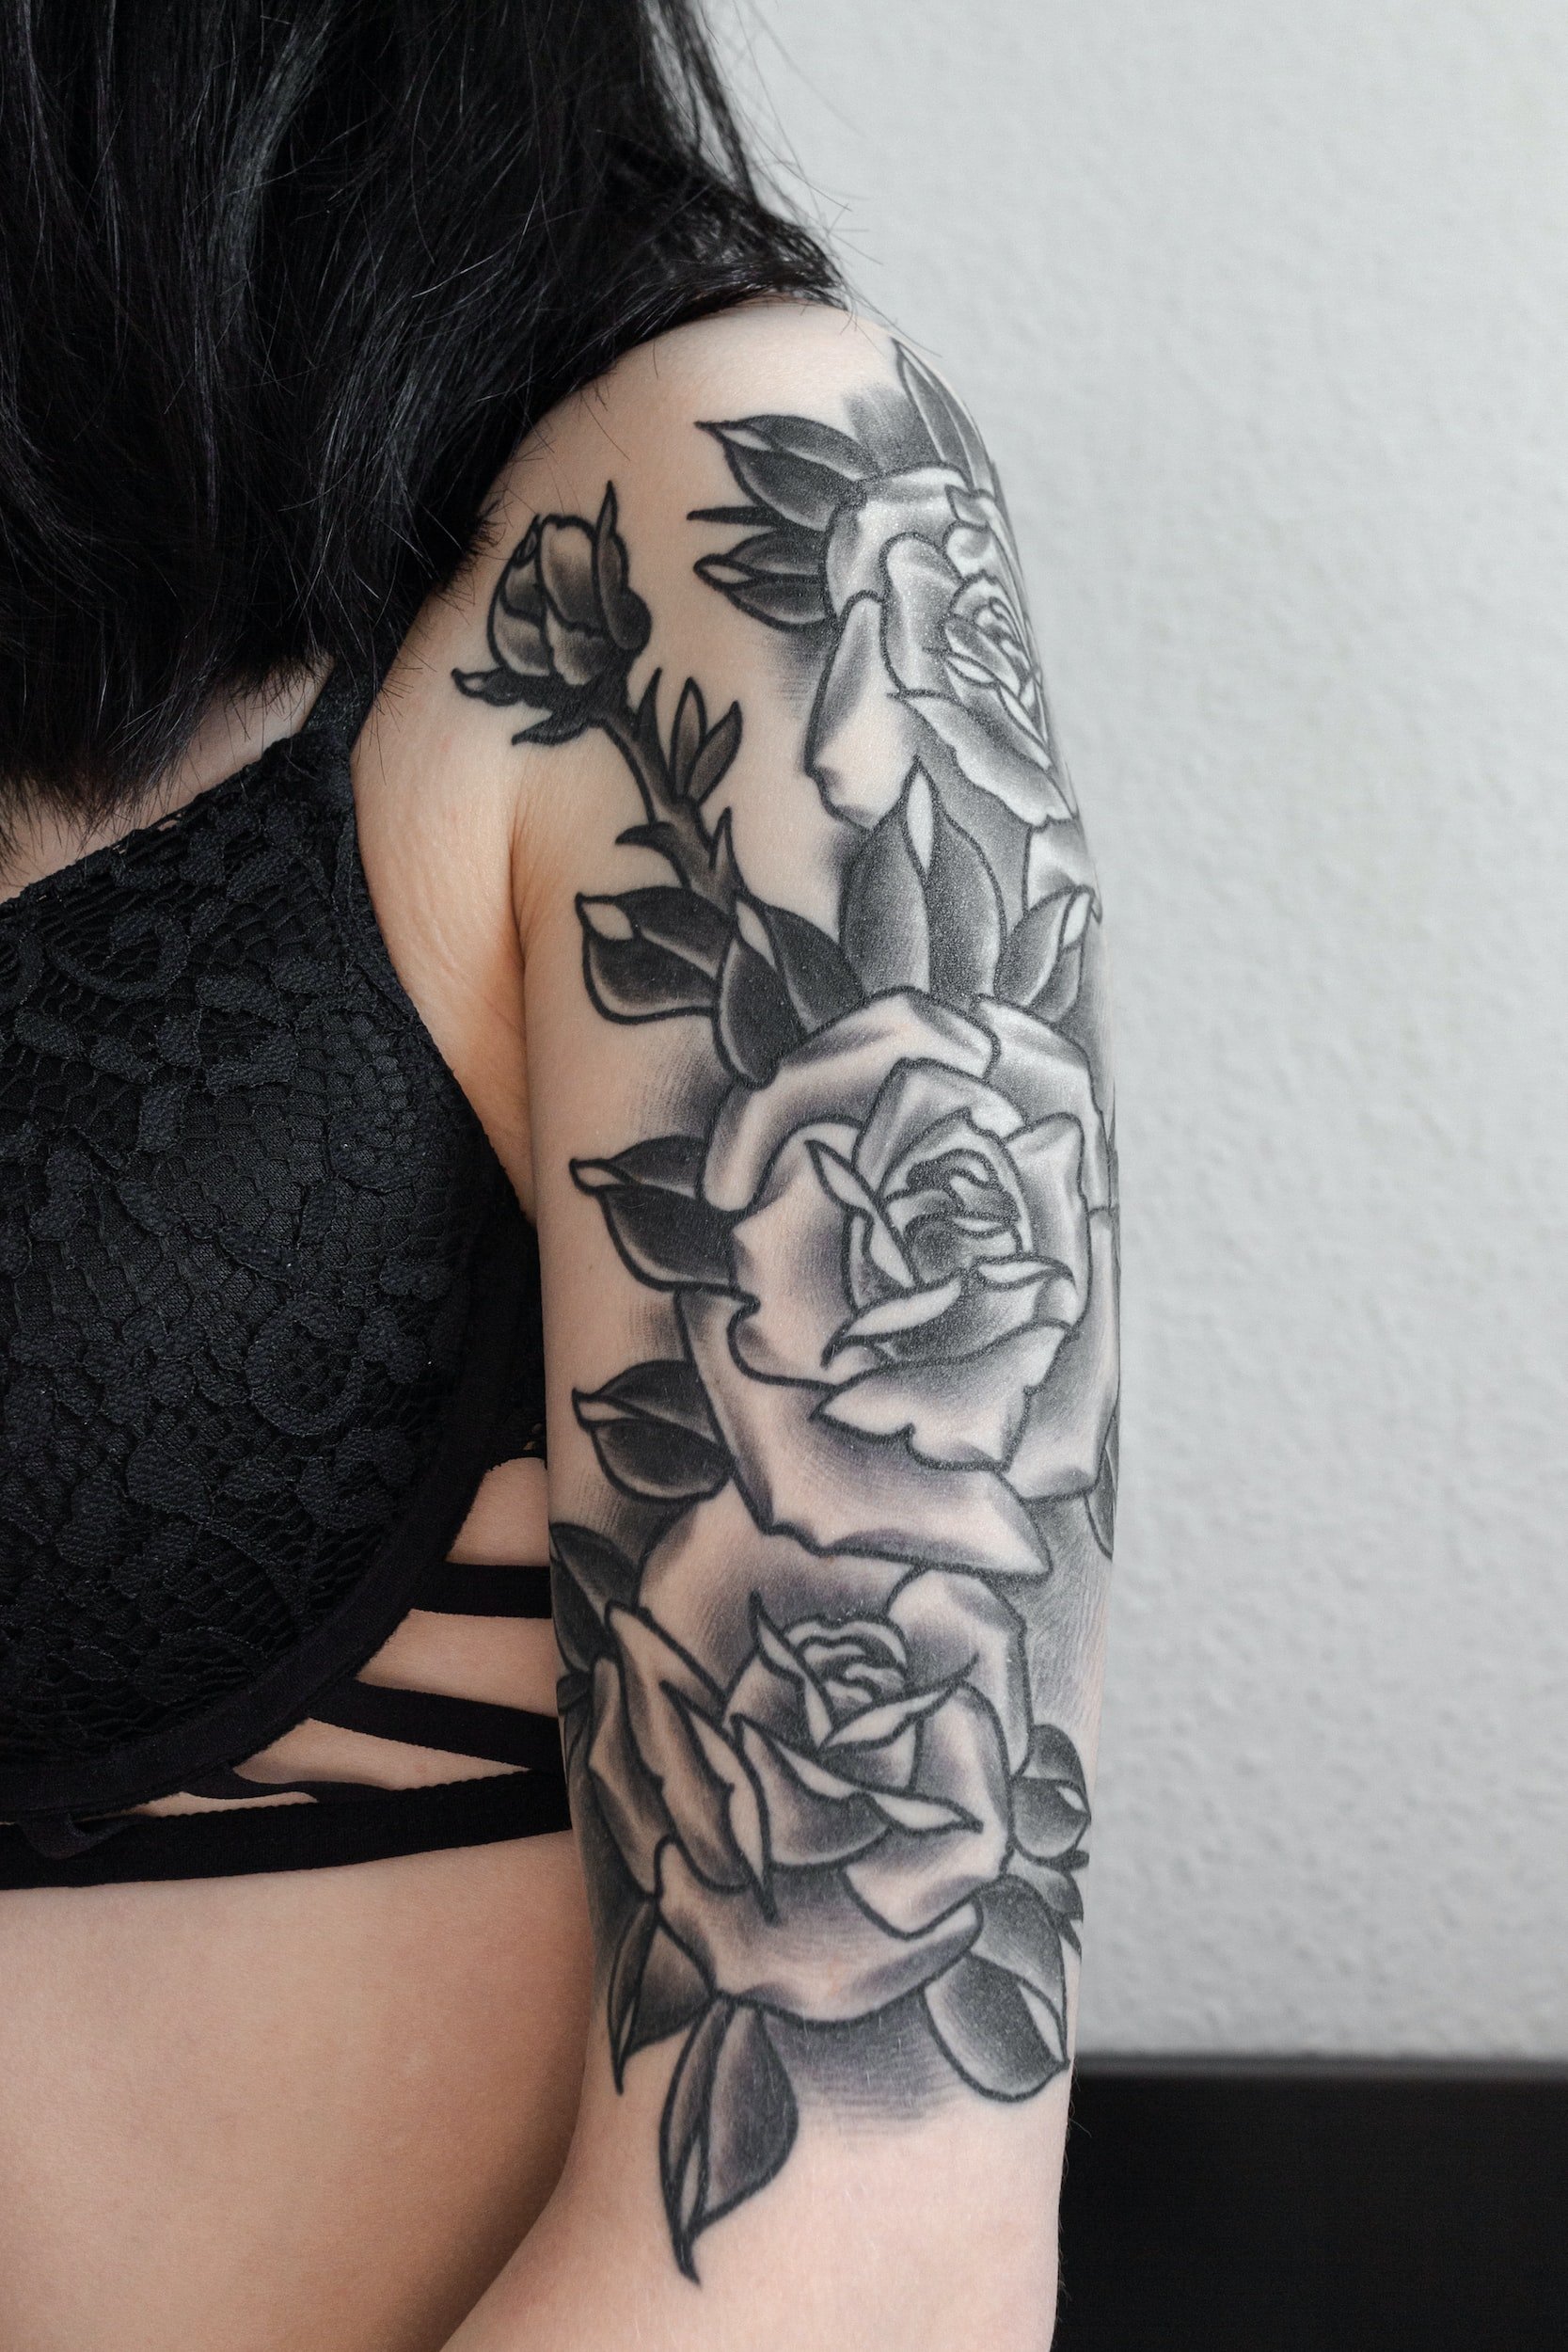 What Does a Rose Tattoo Mean? Is It All About Romance?